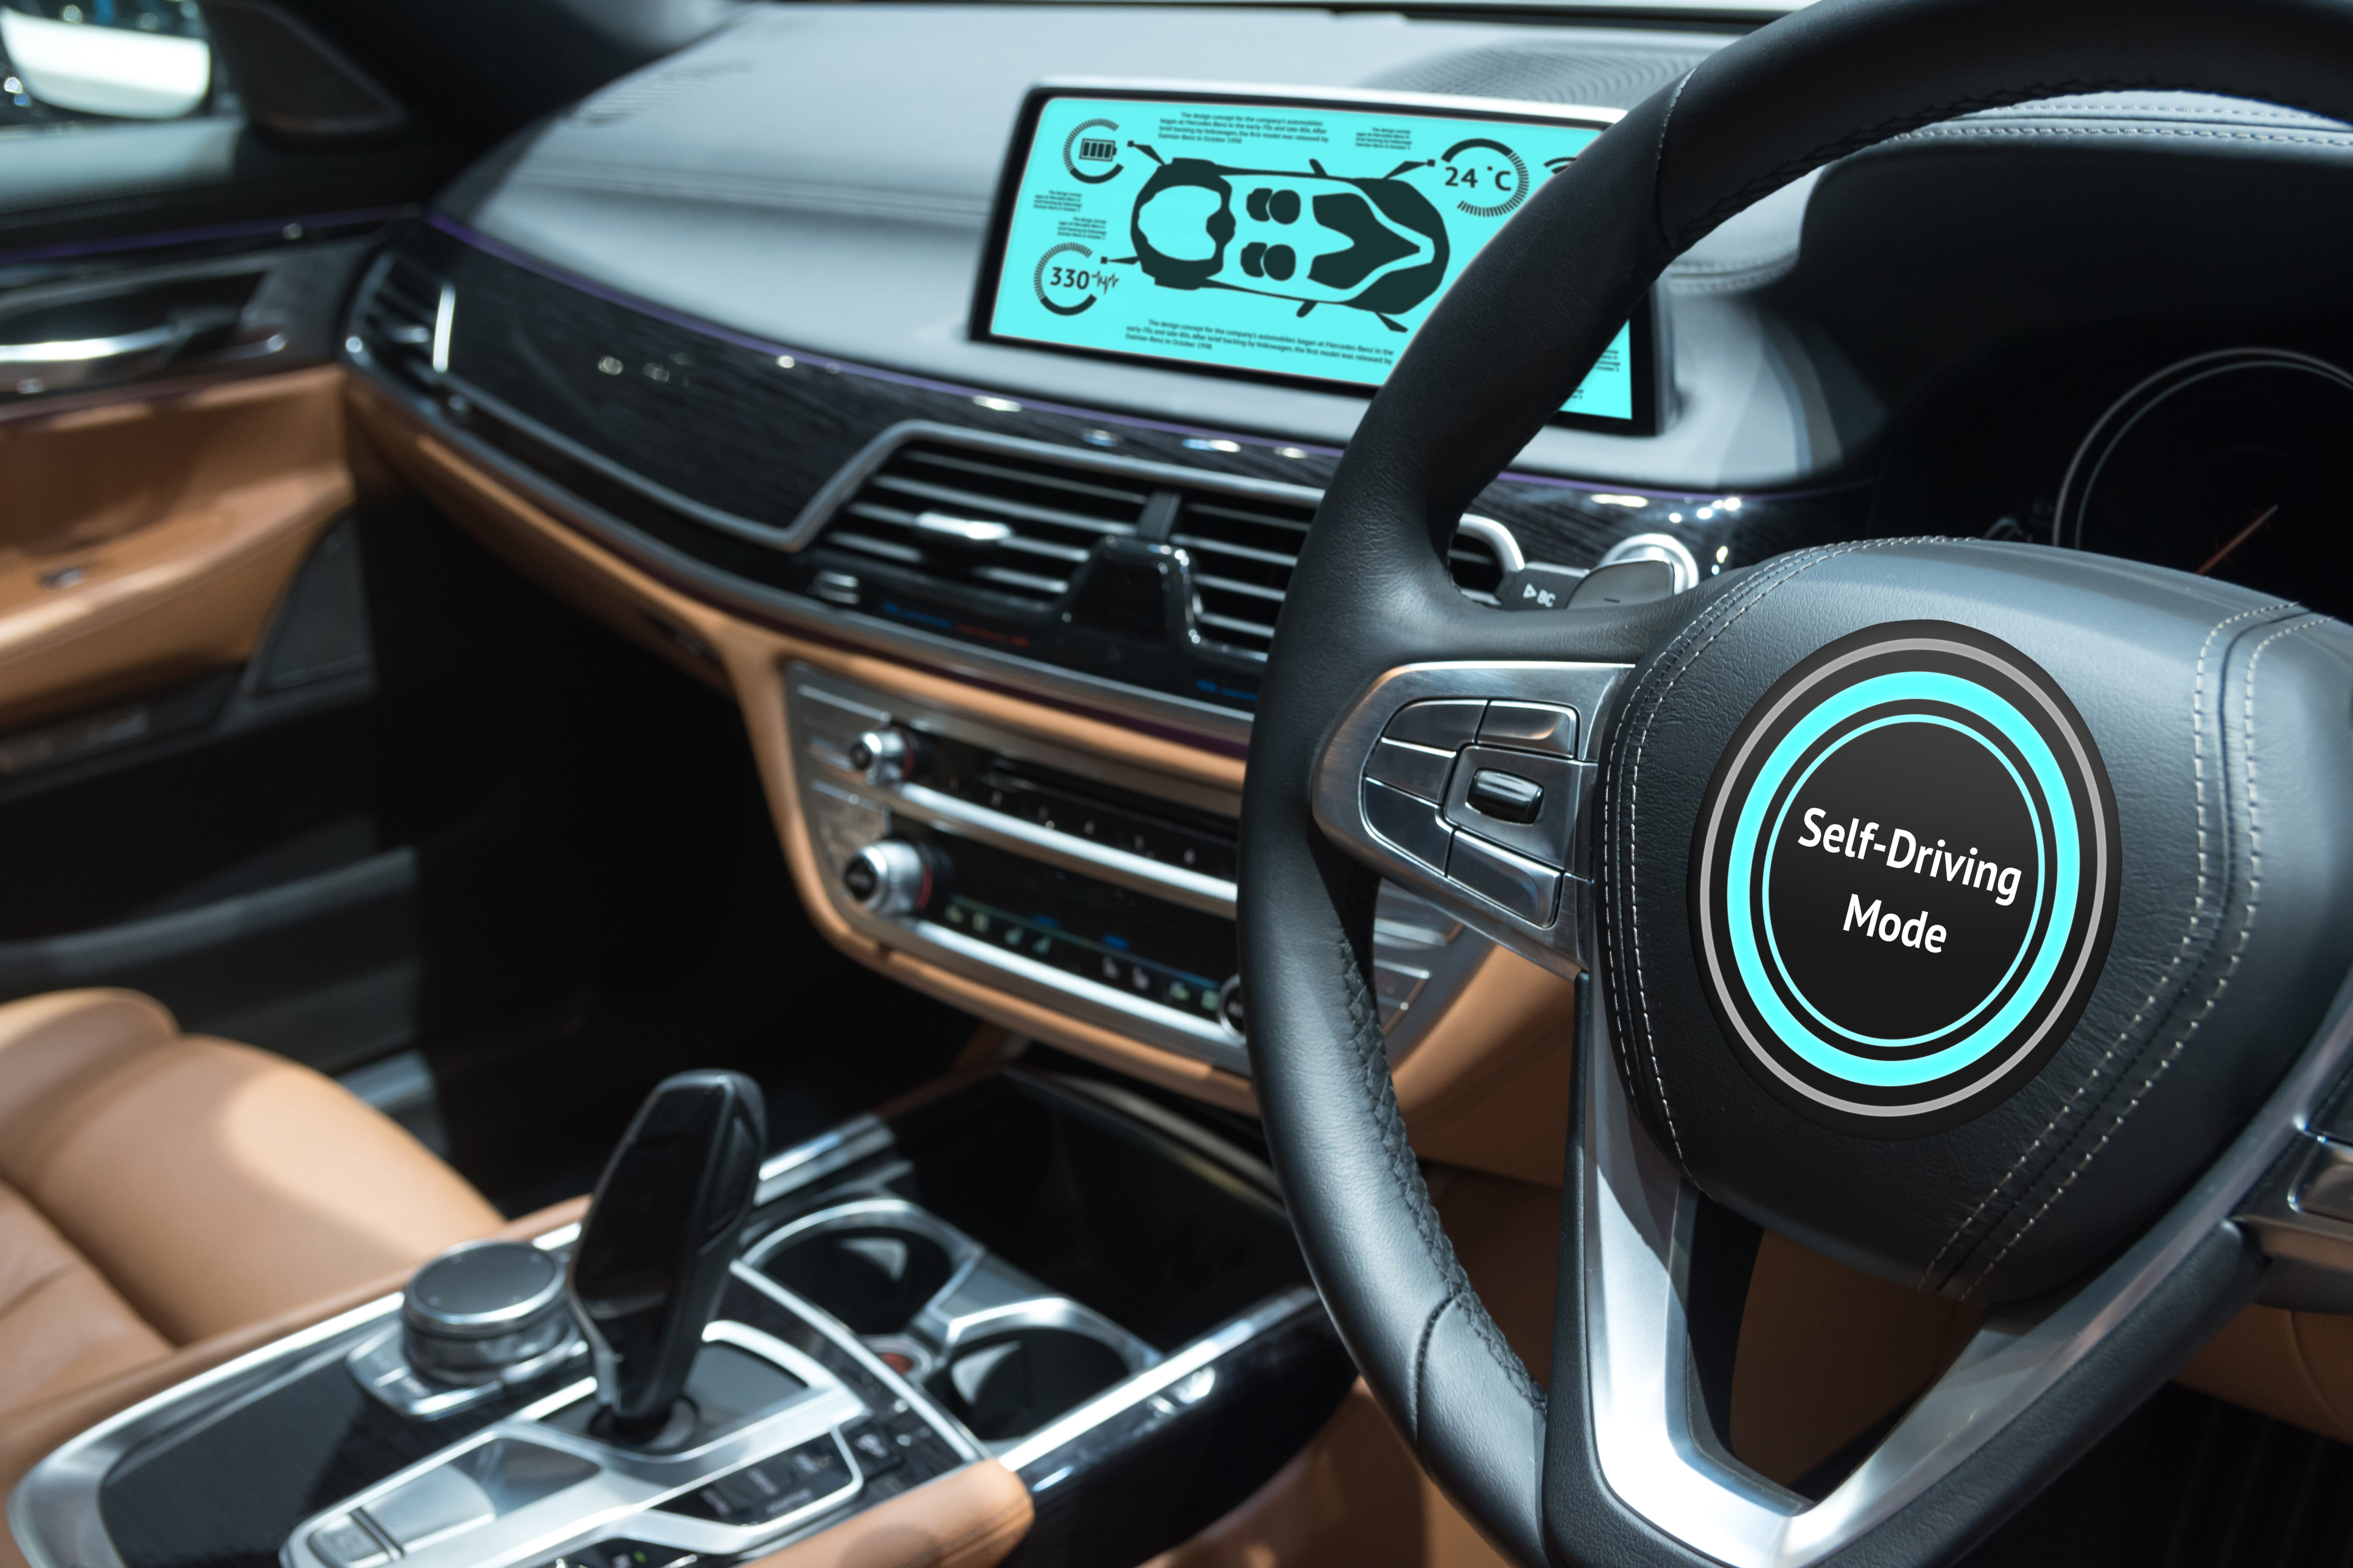 Continental Partners With Intel, BMW and Mobileye For Self-Driving Car initiative